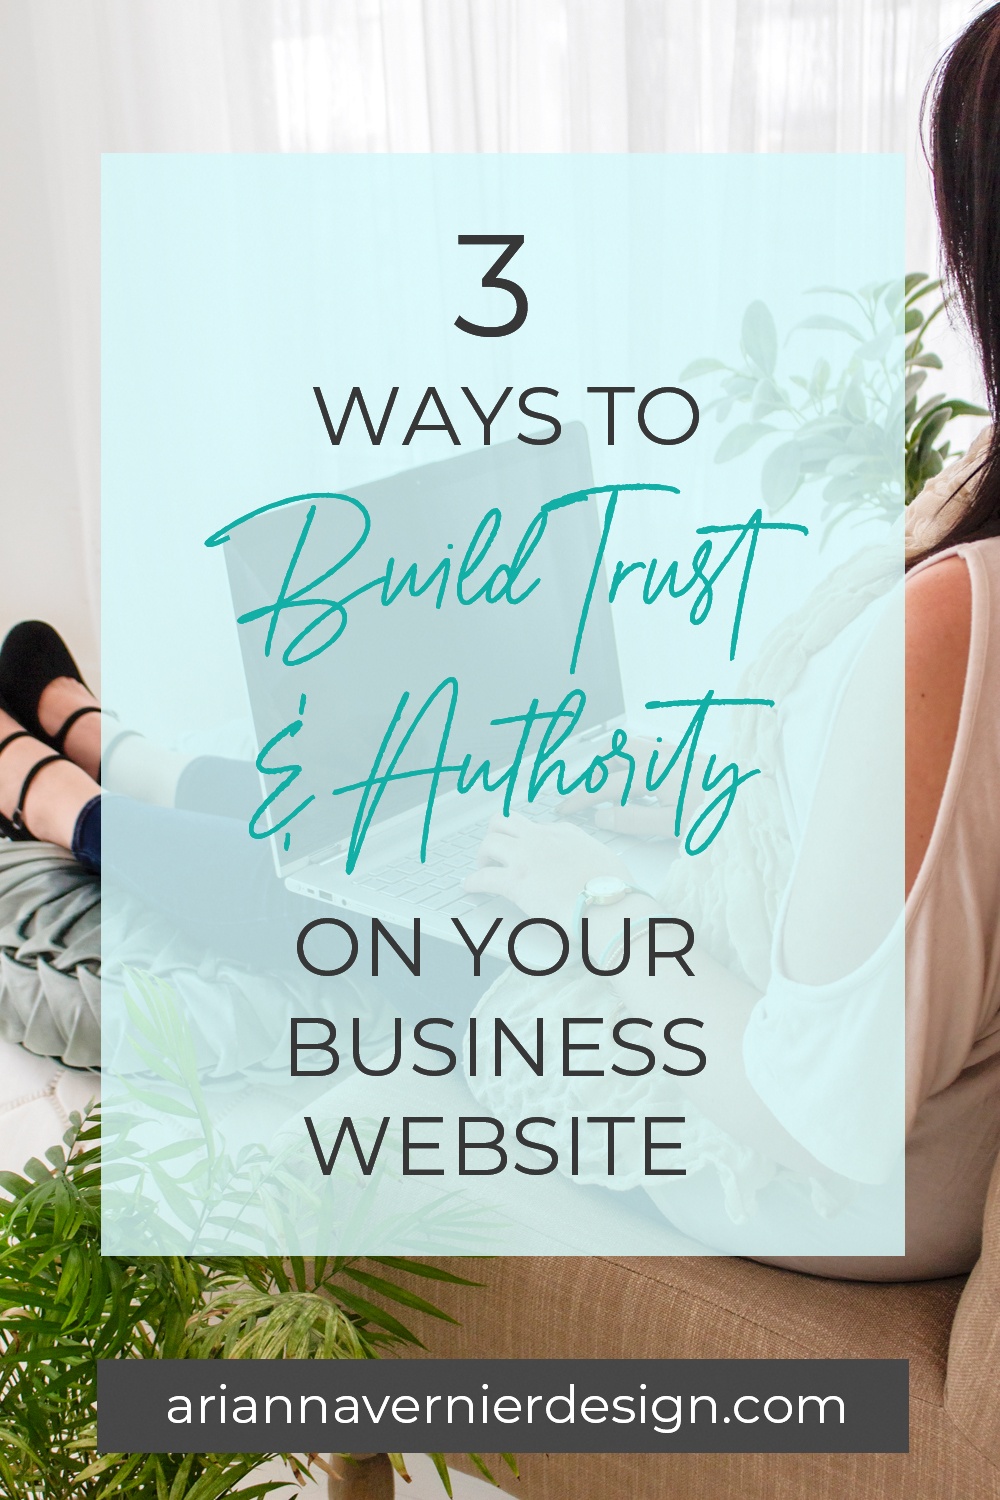 Pinterest pin with a woman on a laptop in the background, with a light blue rectangle over top, and the title "3 Ways to Build Trust and Authority On Your Business Website"